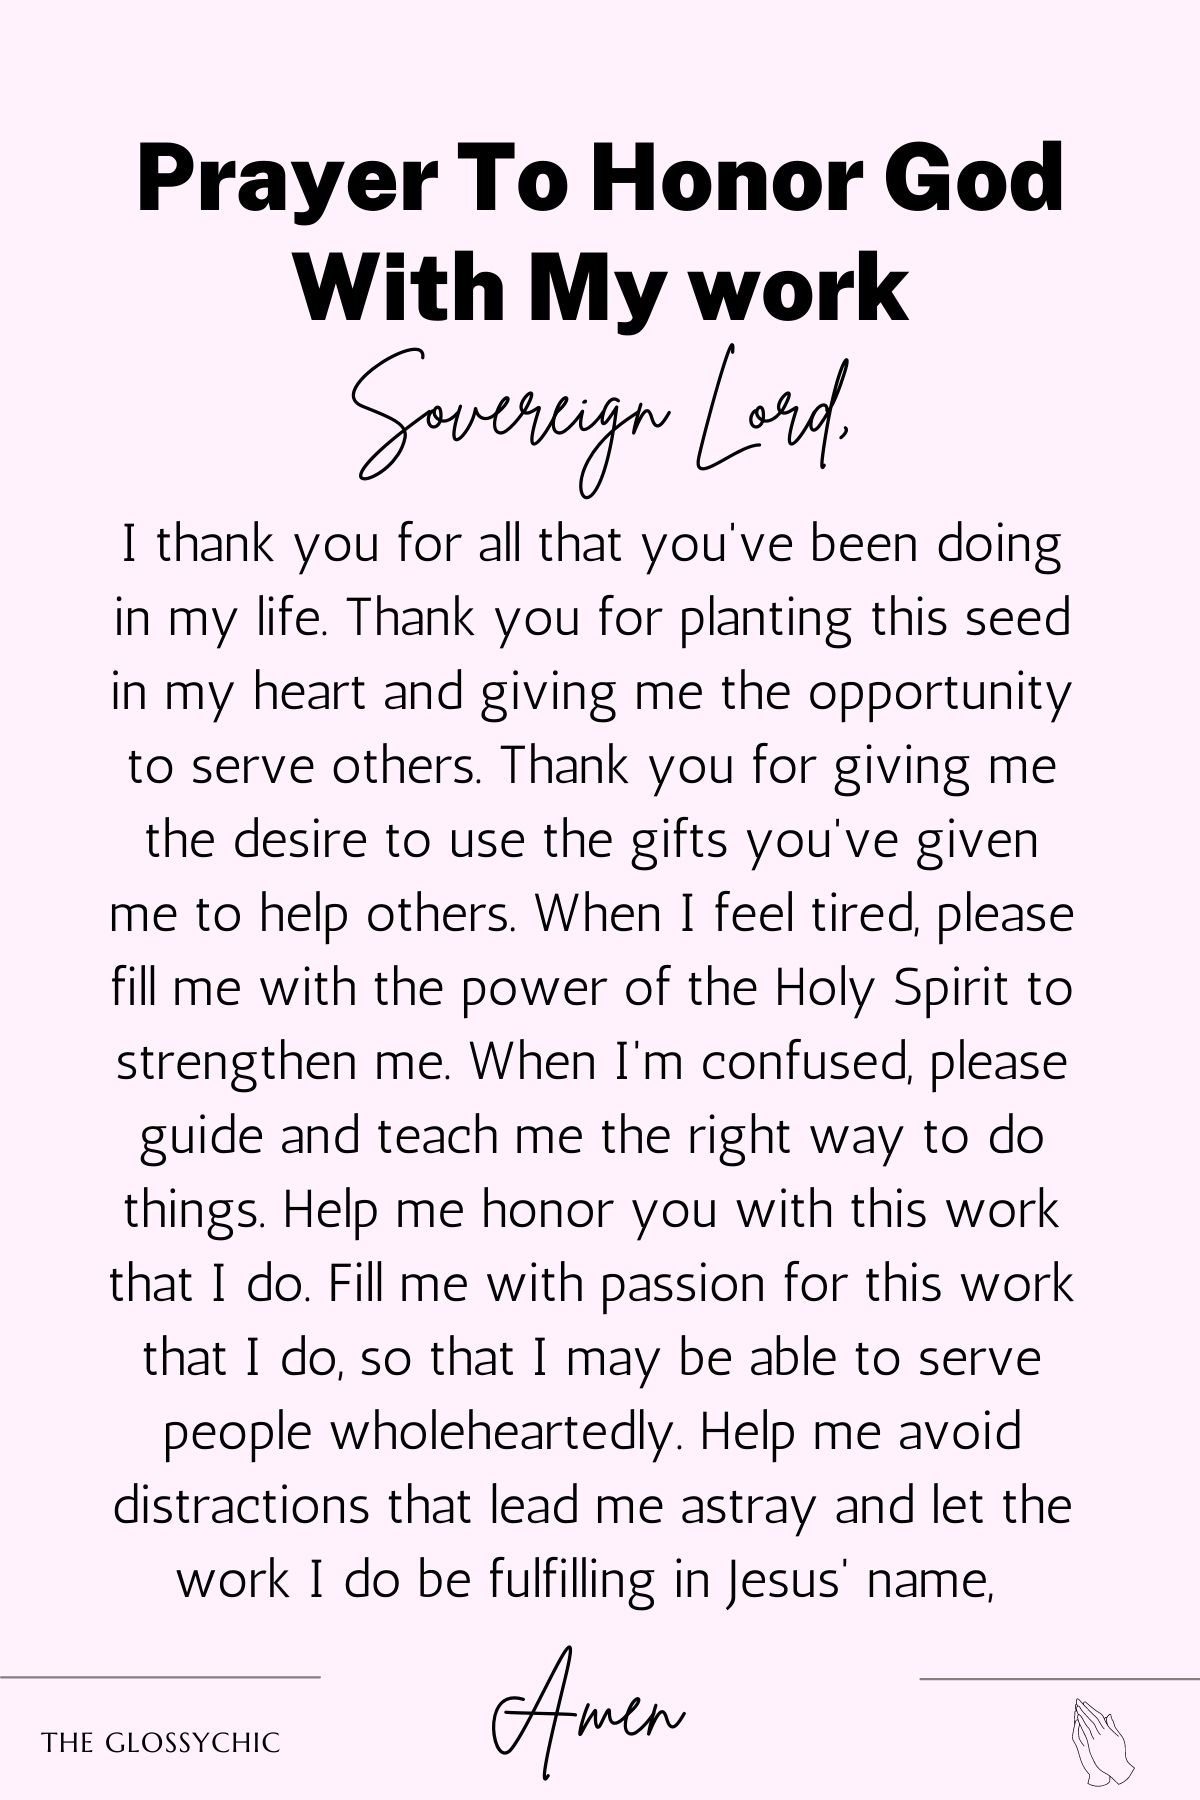 Prayer to honor God with my work